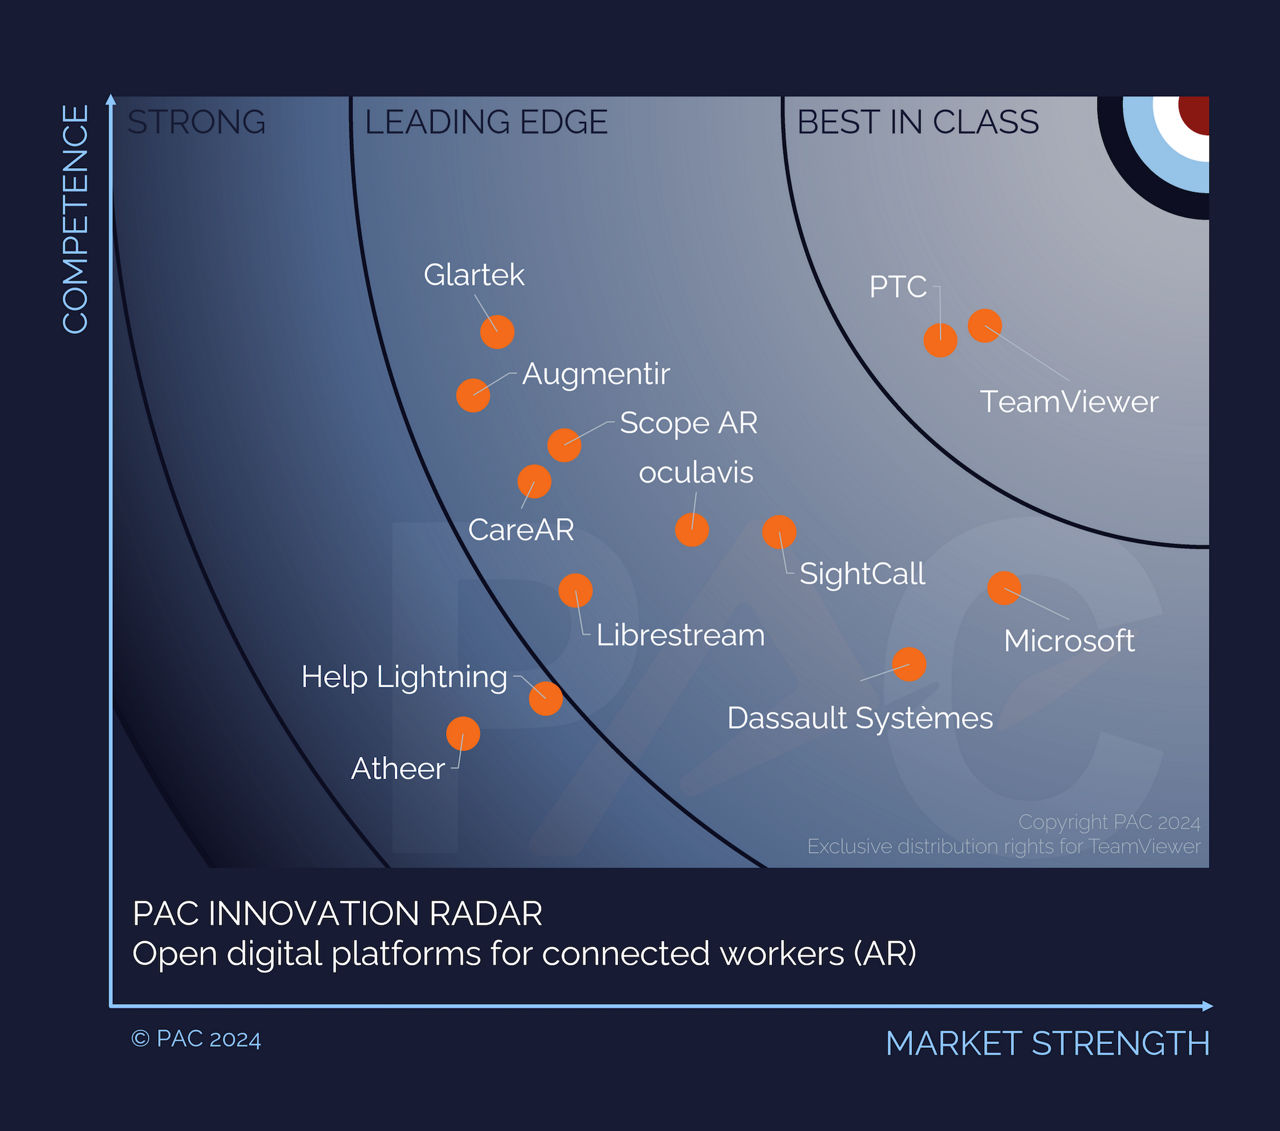 PAC Innovation Radar: Connected Worker (AR)